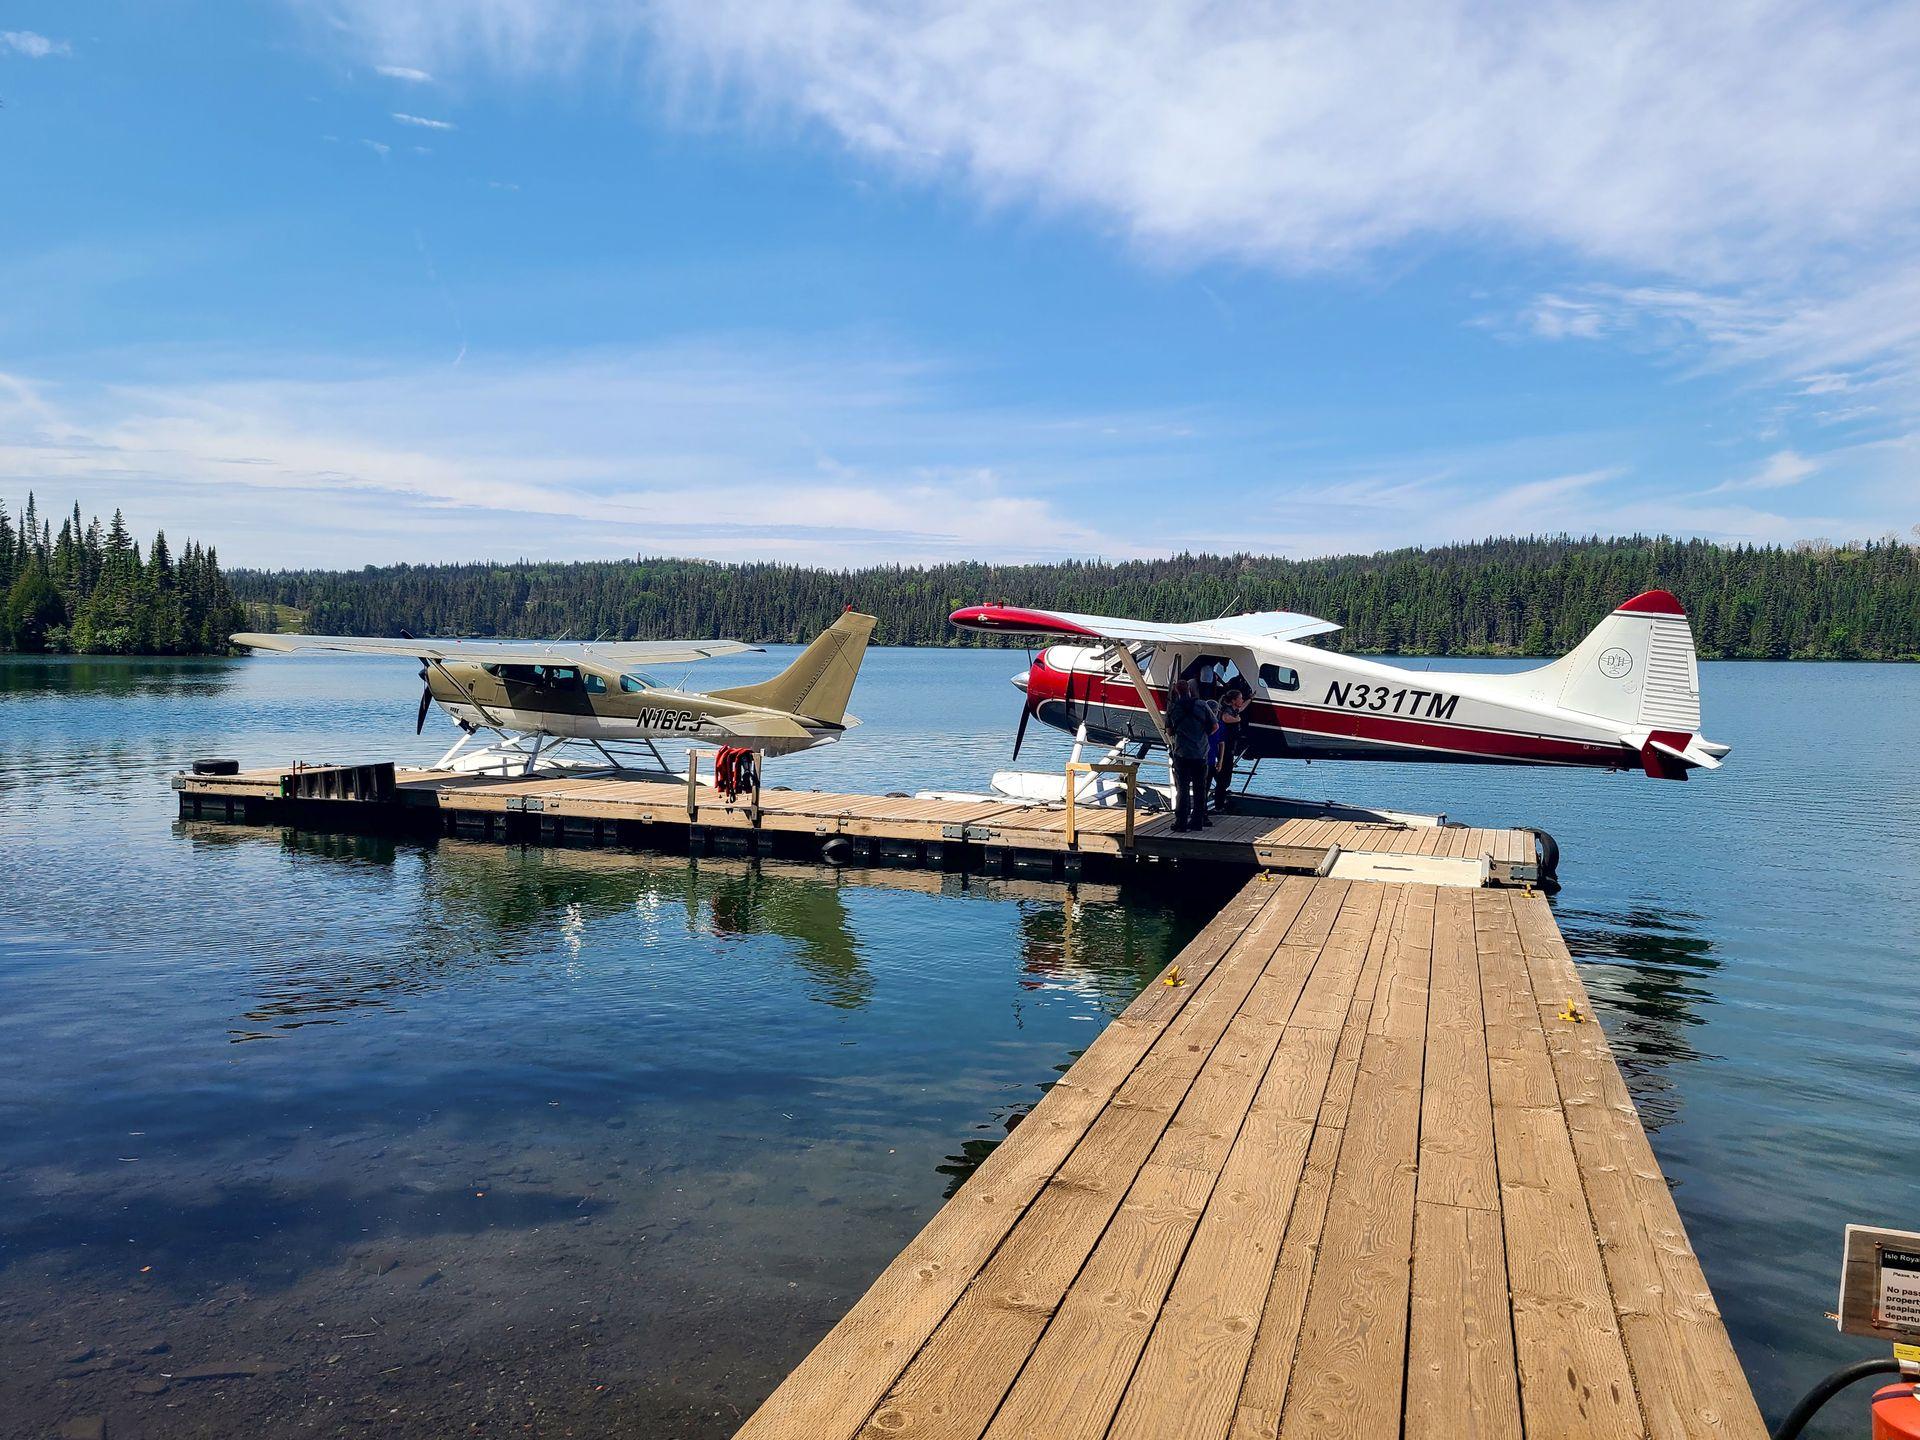 Two seaplanes parked at the Rock harbor dock on Isle Royale